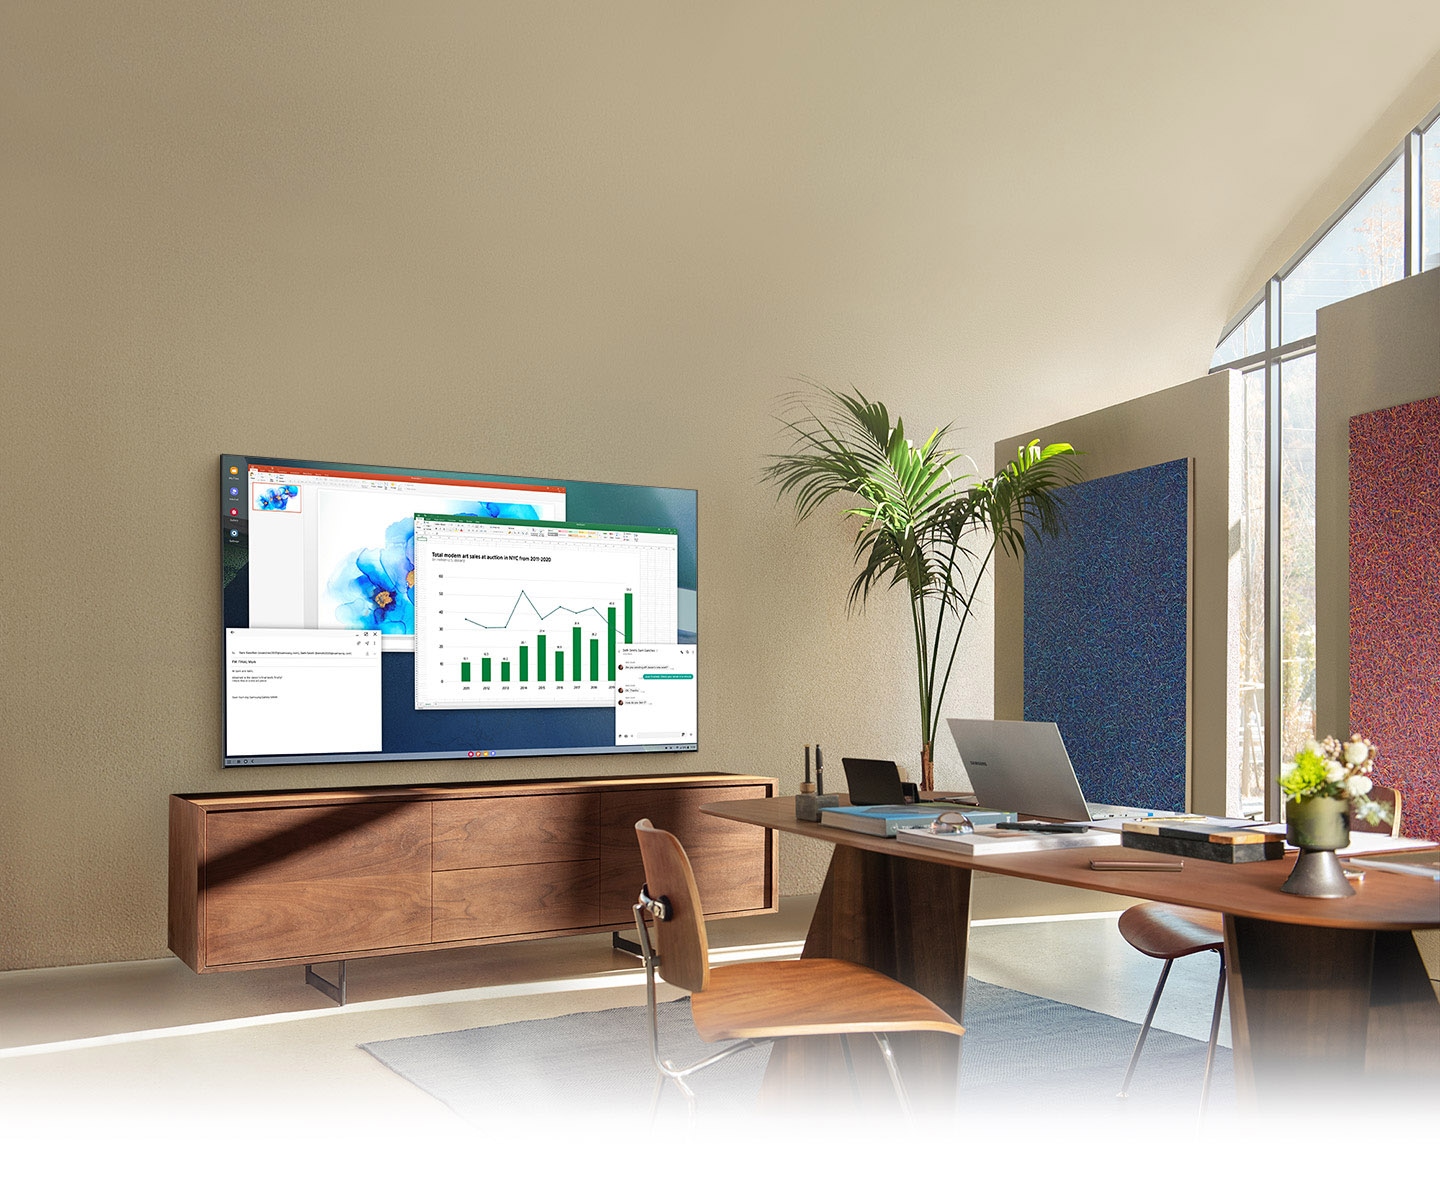 In a living room home office, QLED TV screen shows PC on TV feature which allows home TV to connect to office PC.